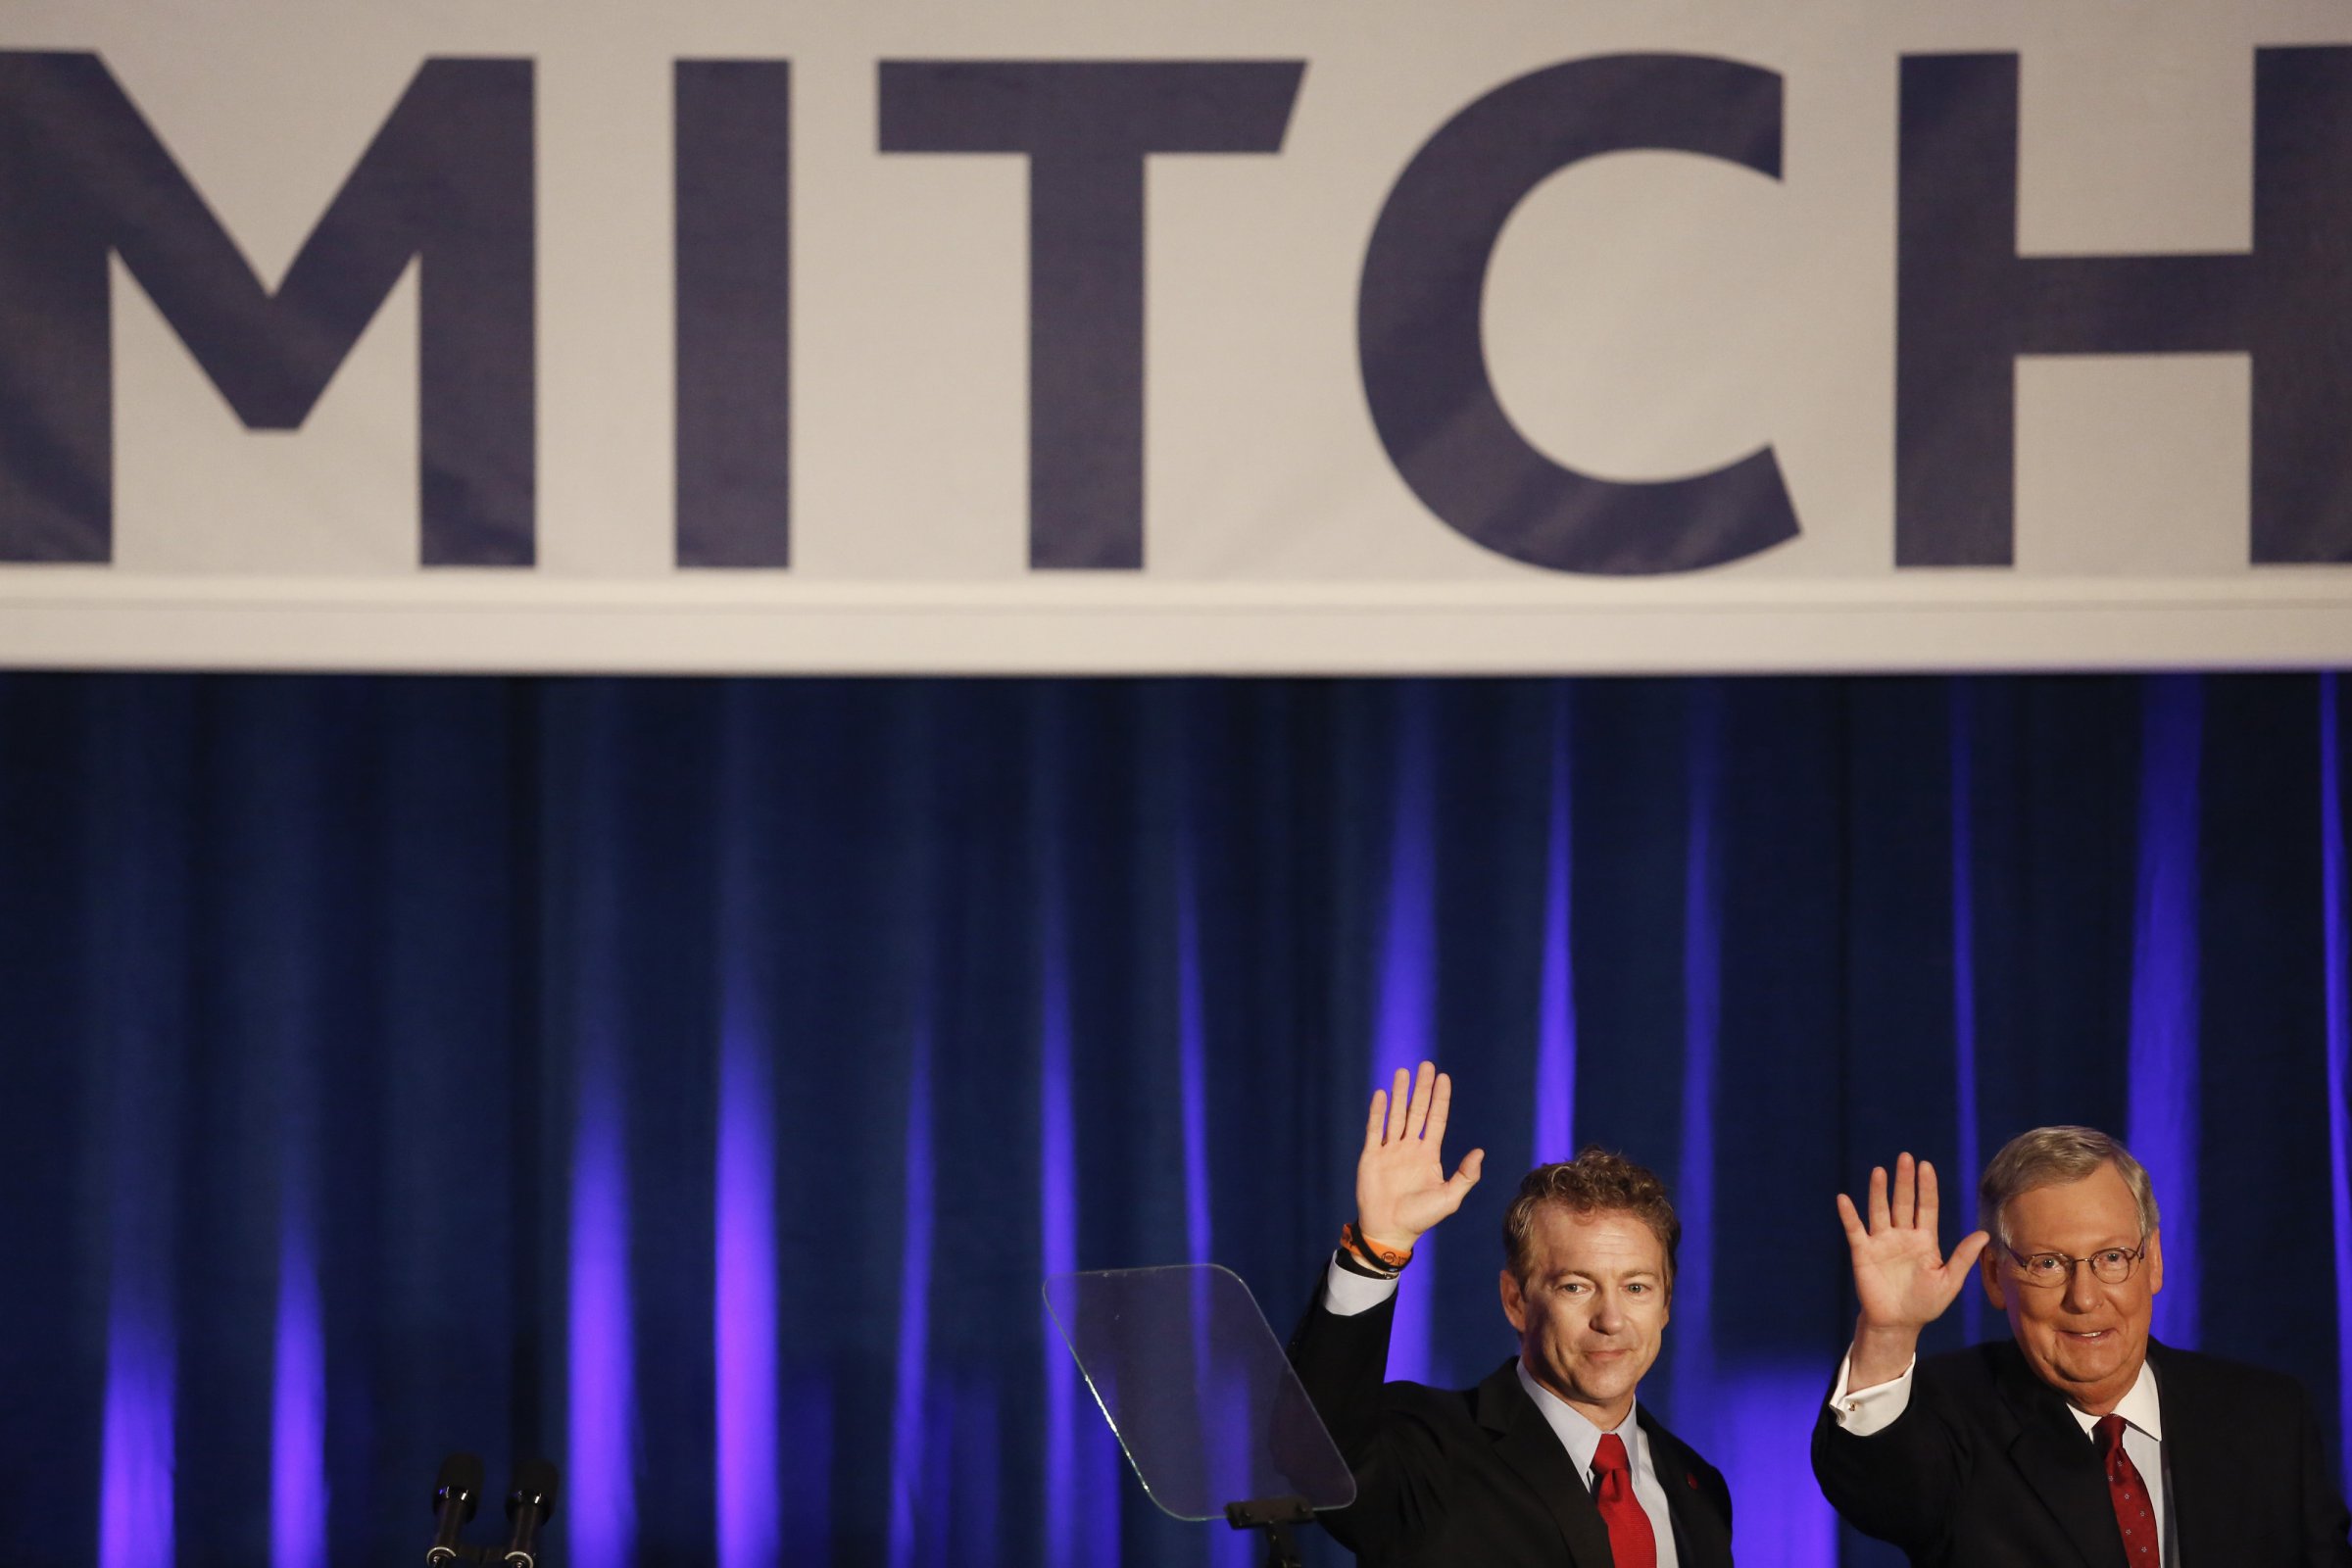 Senate Minority Leader Mitch McConnel and Senator Rand Paul wave to supporters at a Republican Party of Kentucky election night party in Louisville on Nov. 4, 2014.